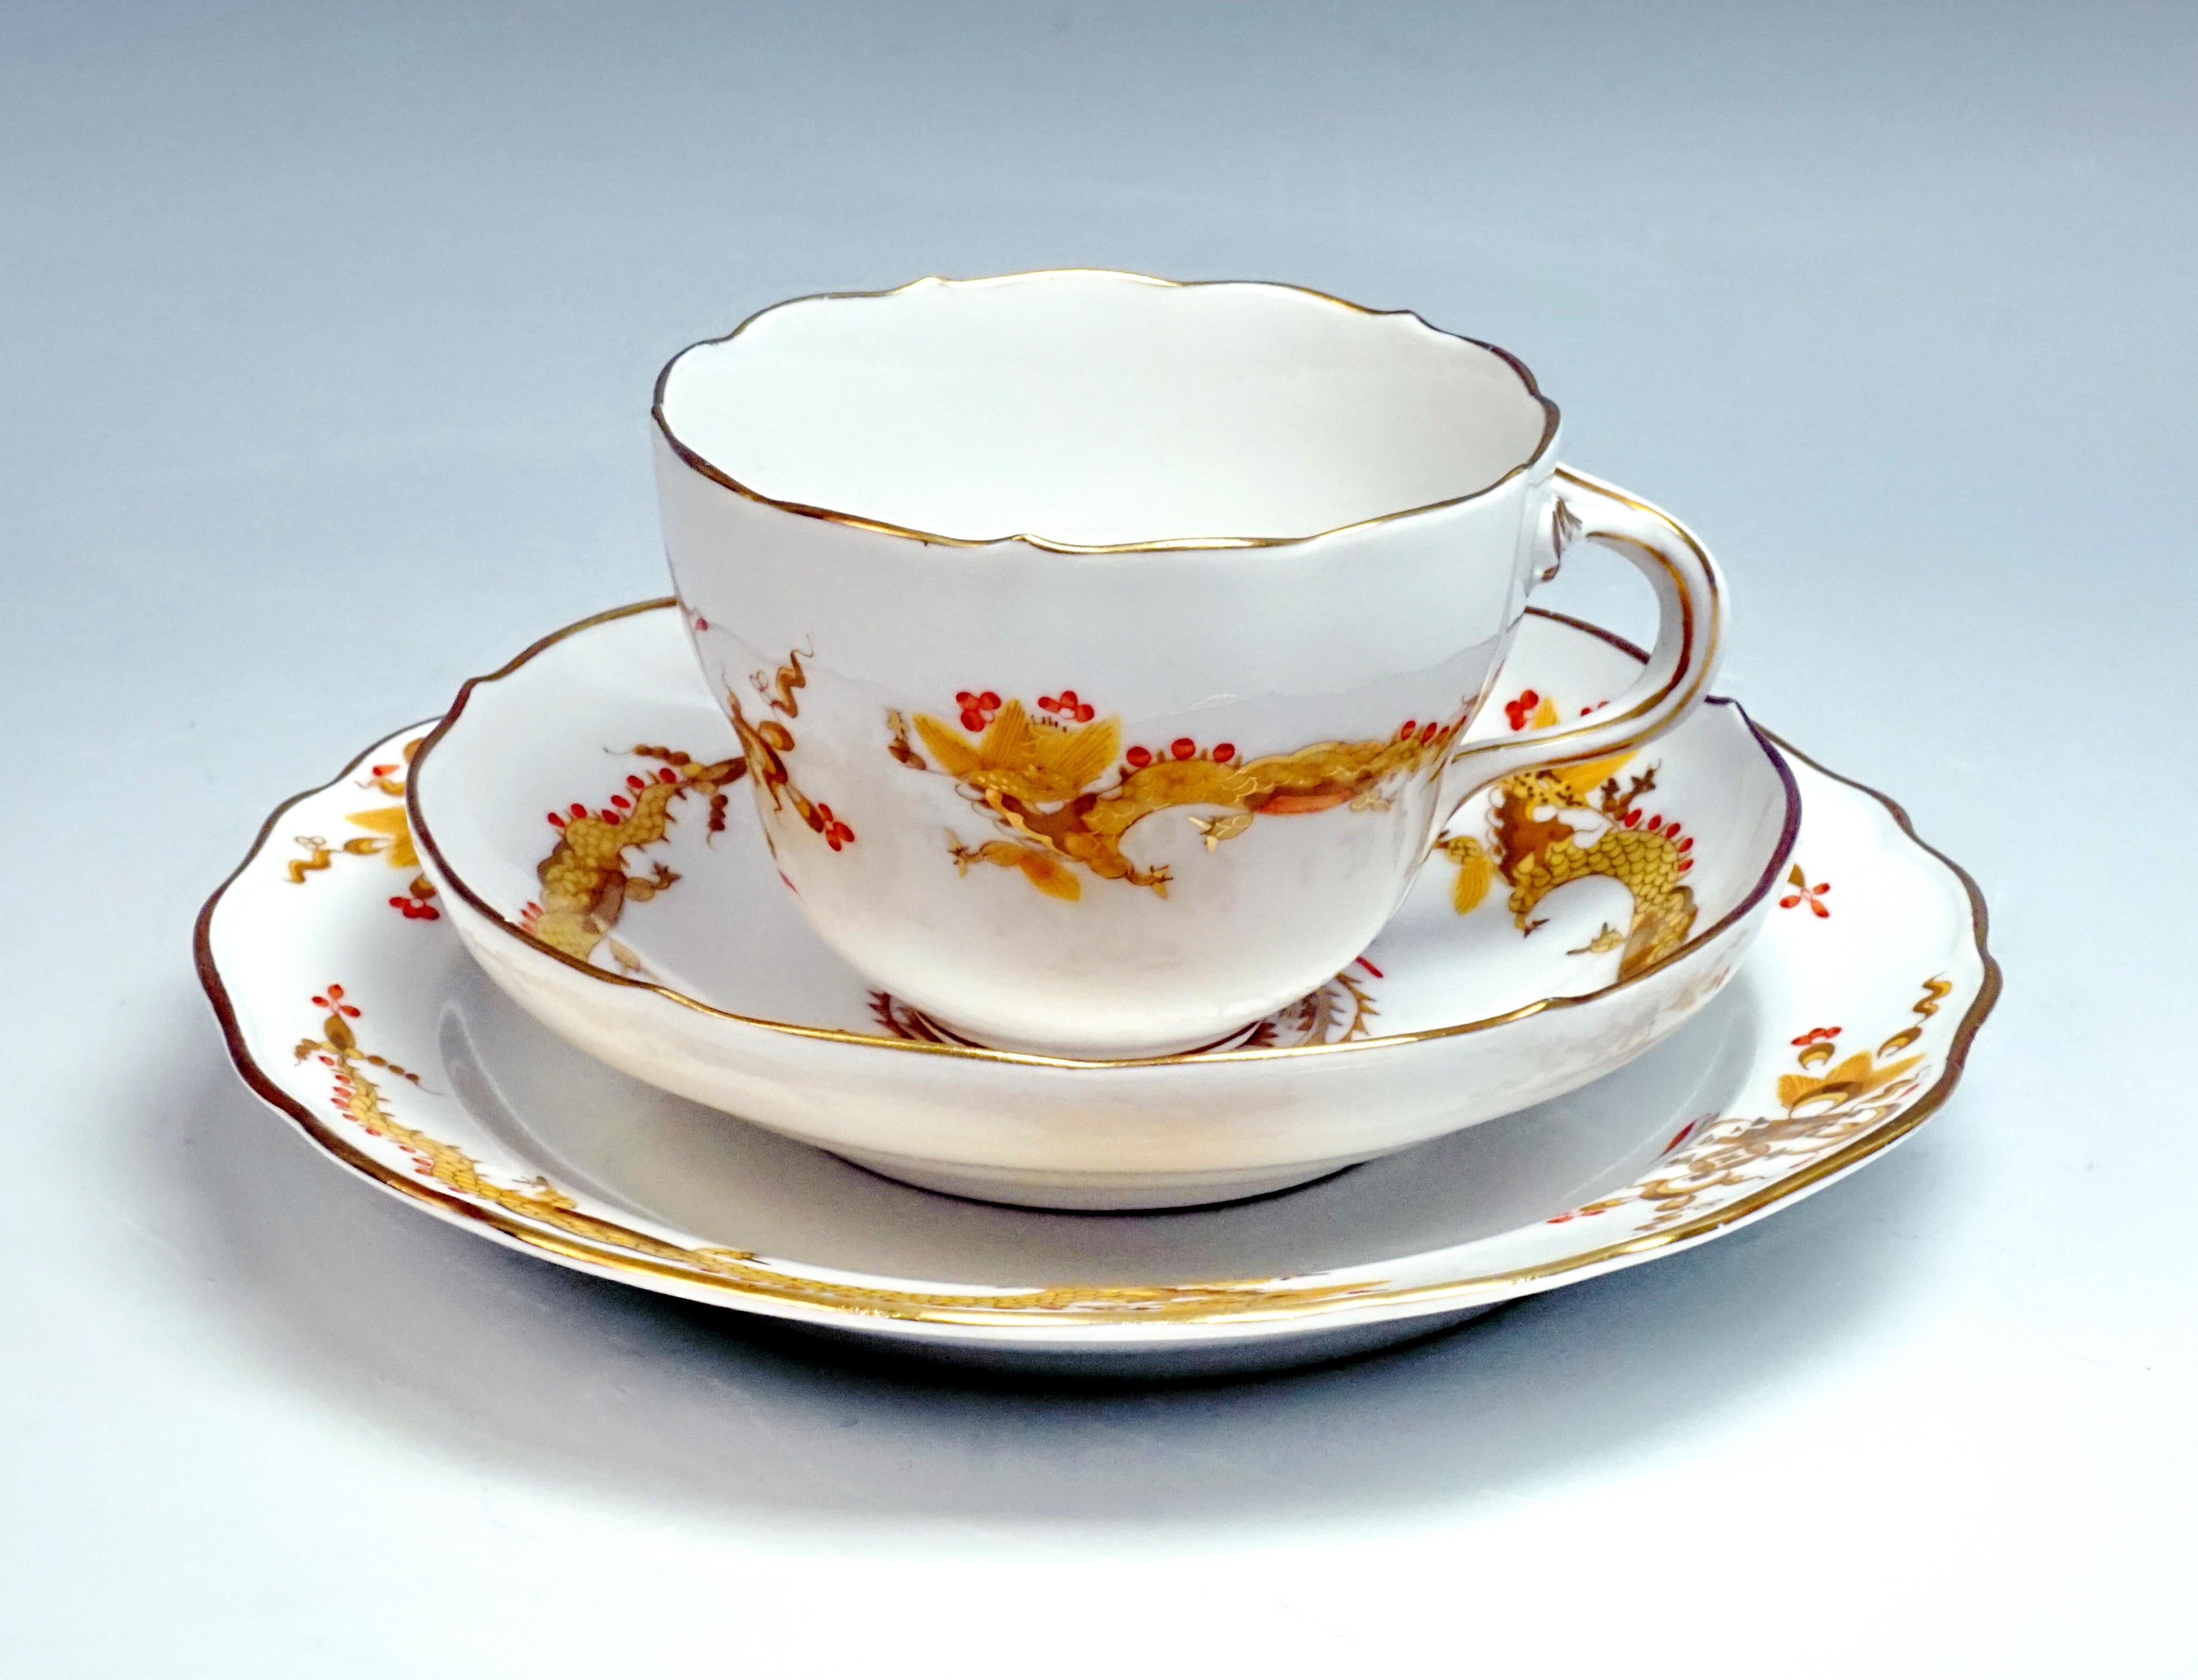 Painted Meissen Coffee and Tee Set with Dessert Plates 12 People Rich Dragon, Yellow